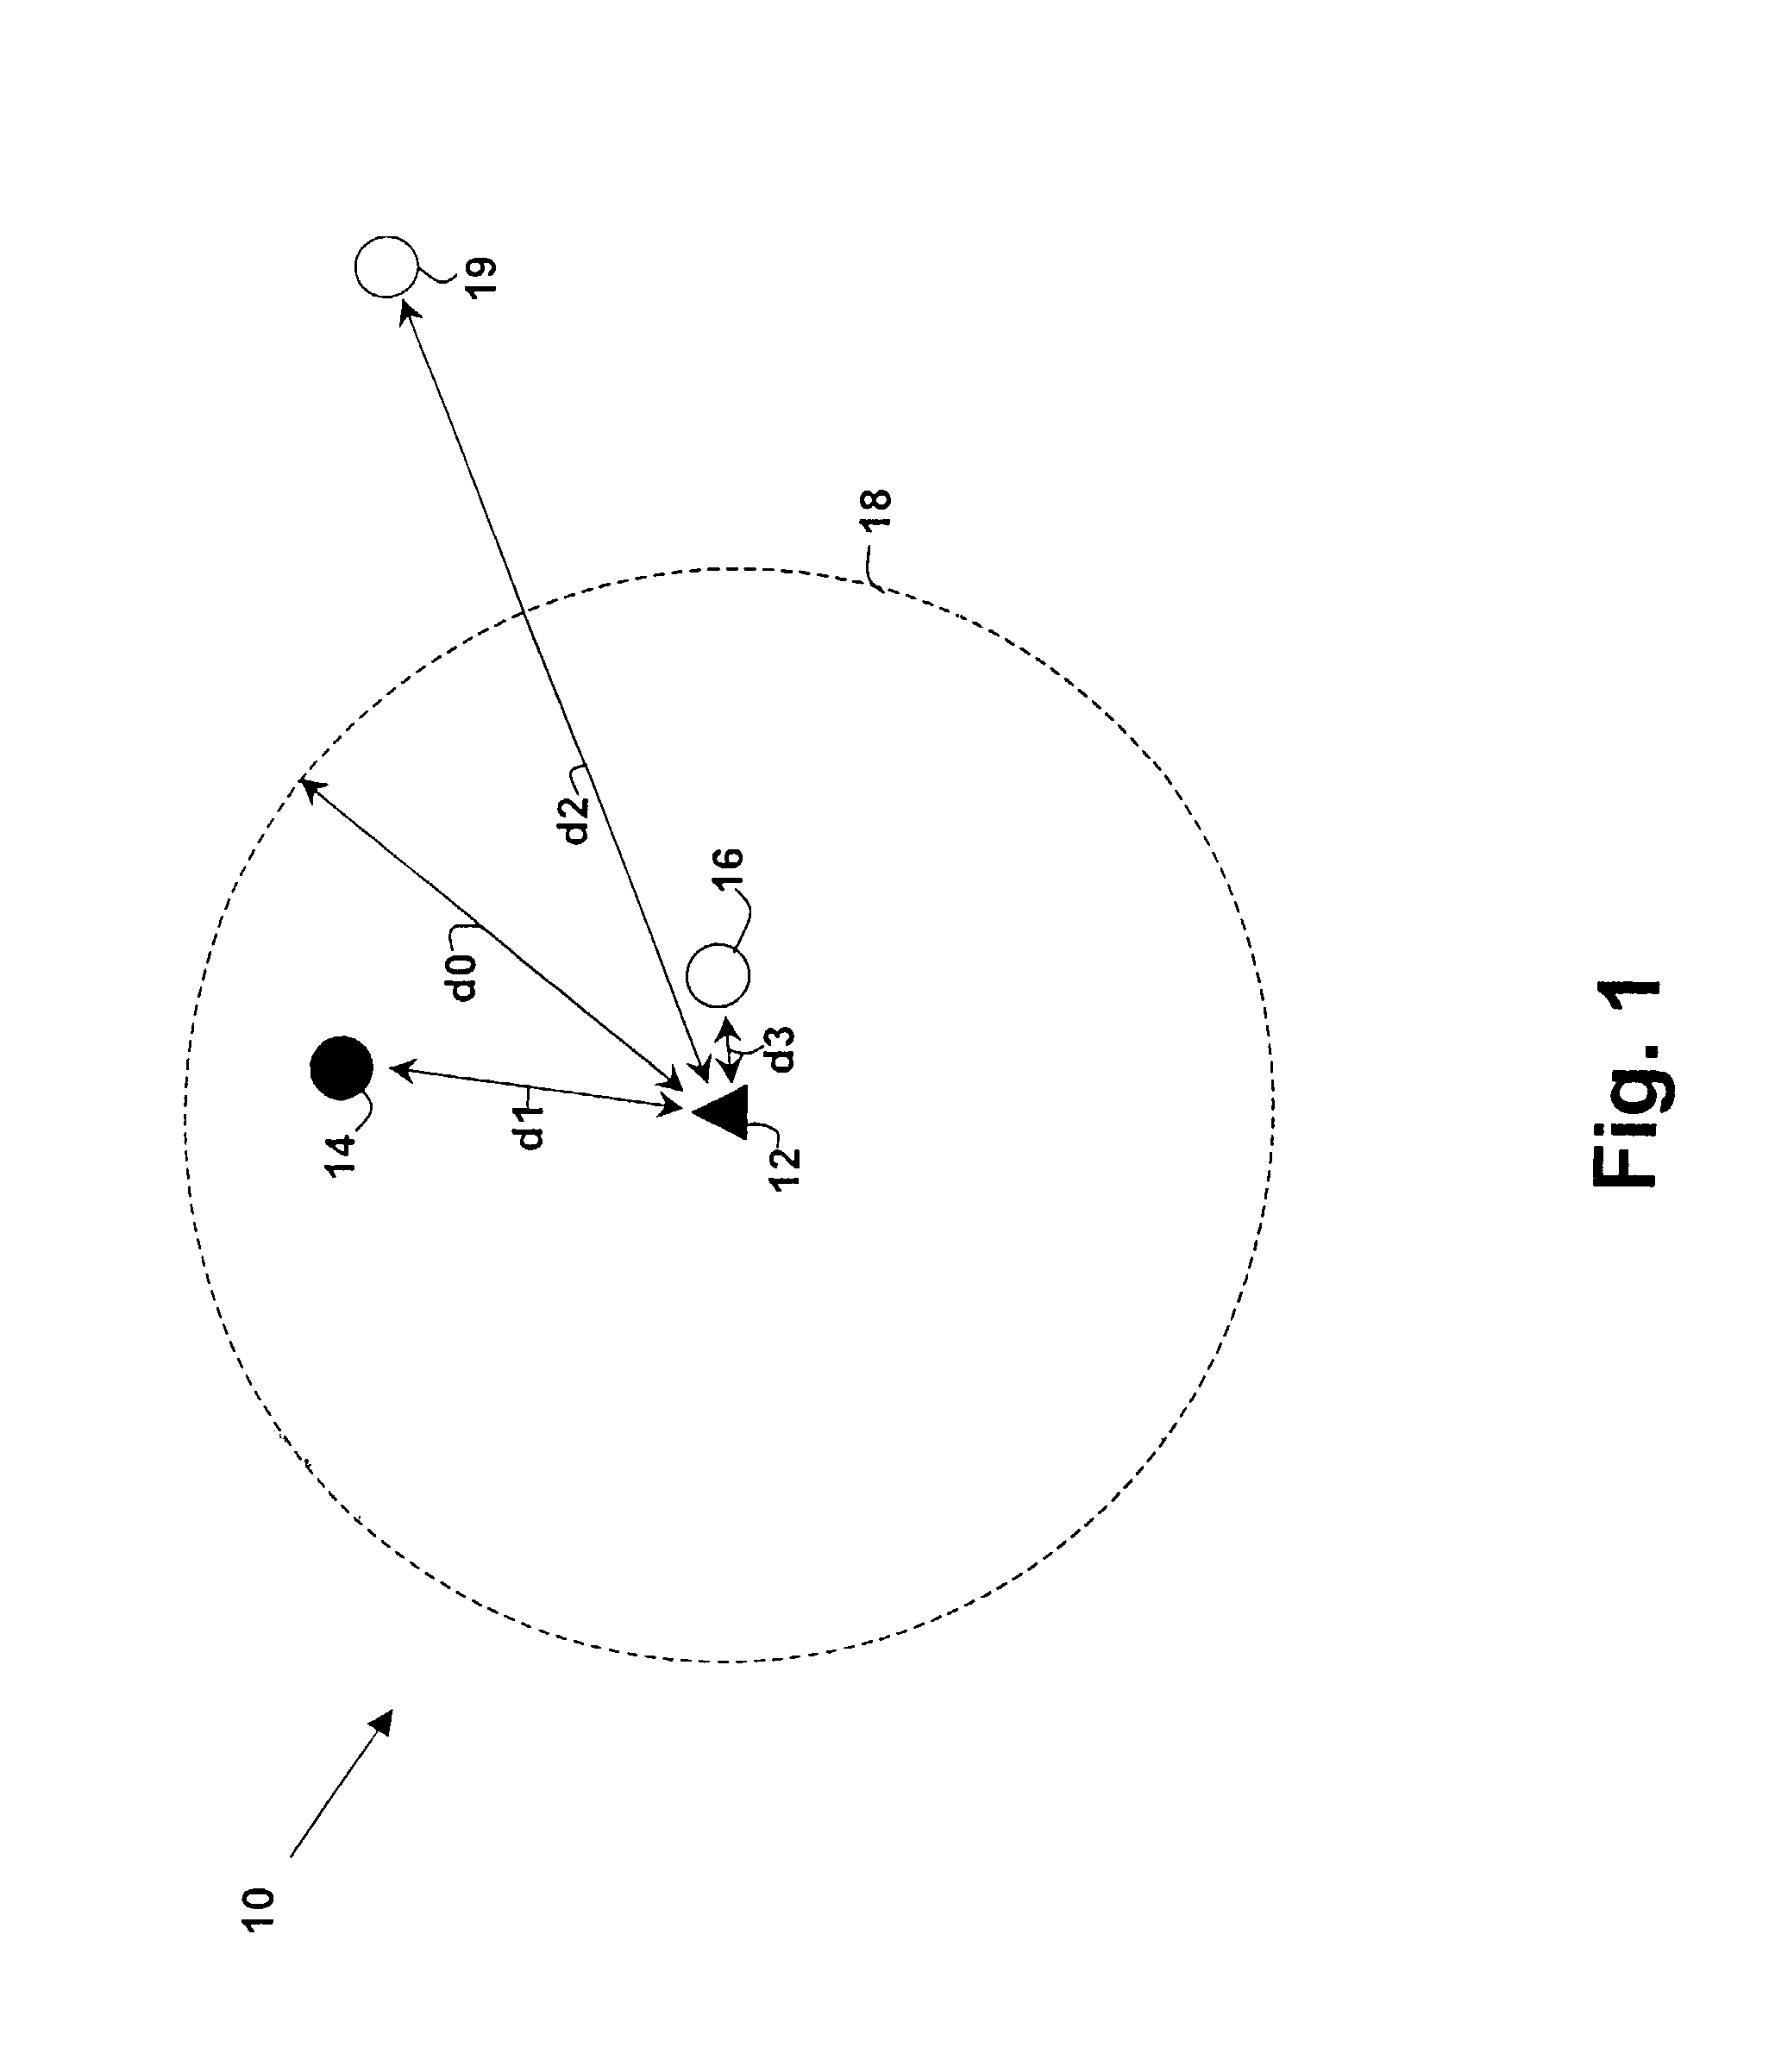 Method and apparatus for enhancing security in a wireless network using distance measurement techniques